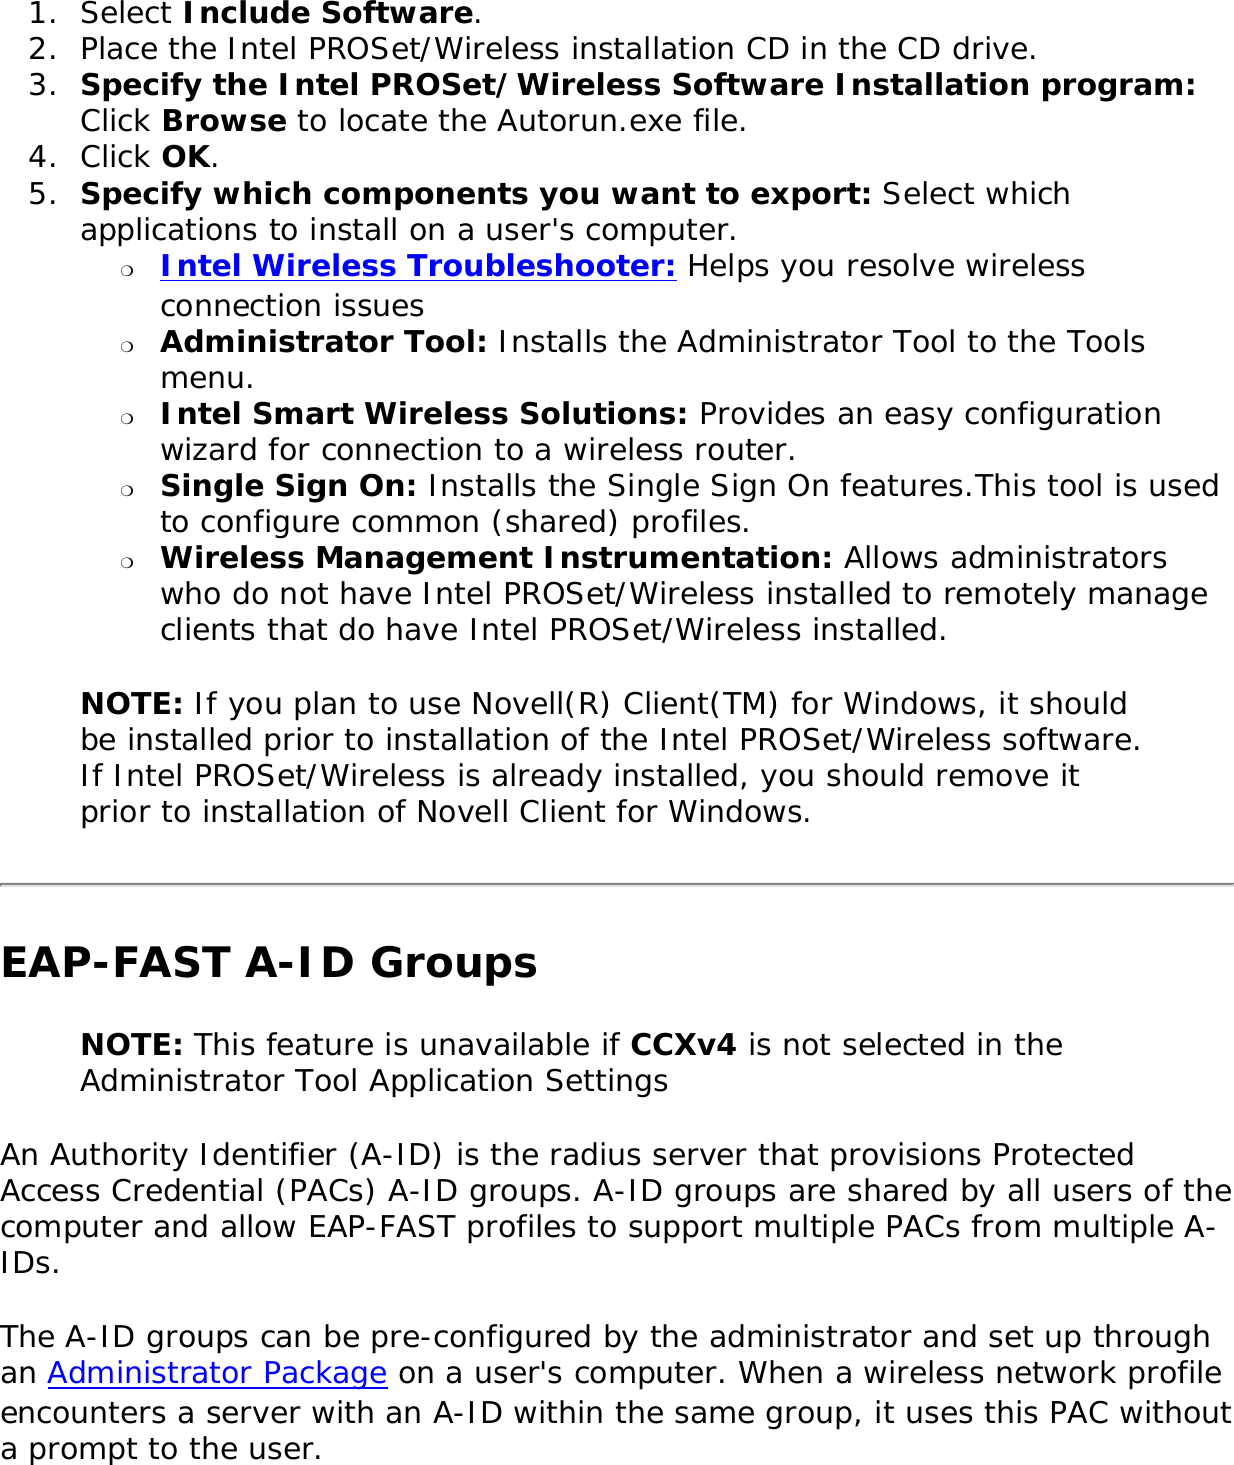 1.  Select Include Software.2.  Place the Intel PROSet/Wireless installation CD in the CD drive. 3.  Specify the Intel PROSet/Wireless Software Installation program: Click Browse to locate the Autorun.exe file. 4.  Click OK. 5.  Specify which components you want to export: Select which applications to install on a user&apos;s computer. ❍     Intel Wireless Troubleshooter: Helps you resolve wireless connection issues❍     Administrator Tool: Installs the Administrator Tool to the Tools menu.❍     Intel Smart Wireless Solutions: Provides an easy configuration wizard for connection to a wireless router.❍     Single Sign On: Installs the Single Sign On features.This tool is used to configure common (shared) profiles. ❍     Wireless Management Instrumentation: Allows administrators who do not have Intel PROSet/Wireless installed to remotely manage clients that do have Intel PROSet/Wireless installed.NOTE: If you plan to use Novell(R) Client(TM) for Windows, it should be installed prior to installation of the Intel PROSet/Wireless software. If Intel PROSet/Wireless is already installed, you should remove it prior to installation of Novell Client for Windows. EAP-FAST A-ID Groups NOTE: This feature is unavailable if CCXv4 is not selected in the Administrator Tool Application SettingsAn Authority Identifier (A-ID) is the radius server that provisions Protected Access Credential (PACs) A-ID groups. A-ID groups are shared by all users of the computer and allow EAP-FAST profiles to support multiple PACs from multiple A-IDs.The A-ID groups can be pre-configured by the administrator and set up through an Administrator Package on a user&apos;s computer. When a wireless network profile encounters a server with an A-ID within the same group, it uses this PAC without a prompt to the user. 